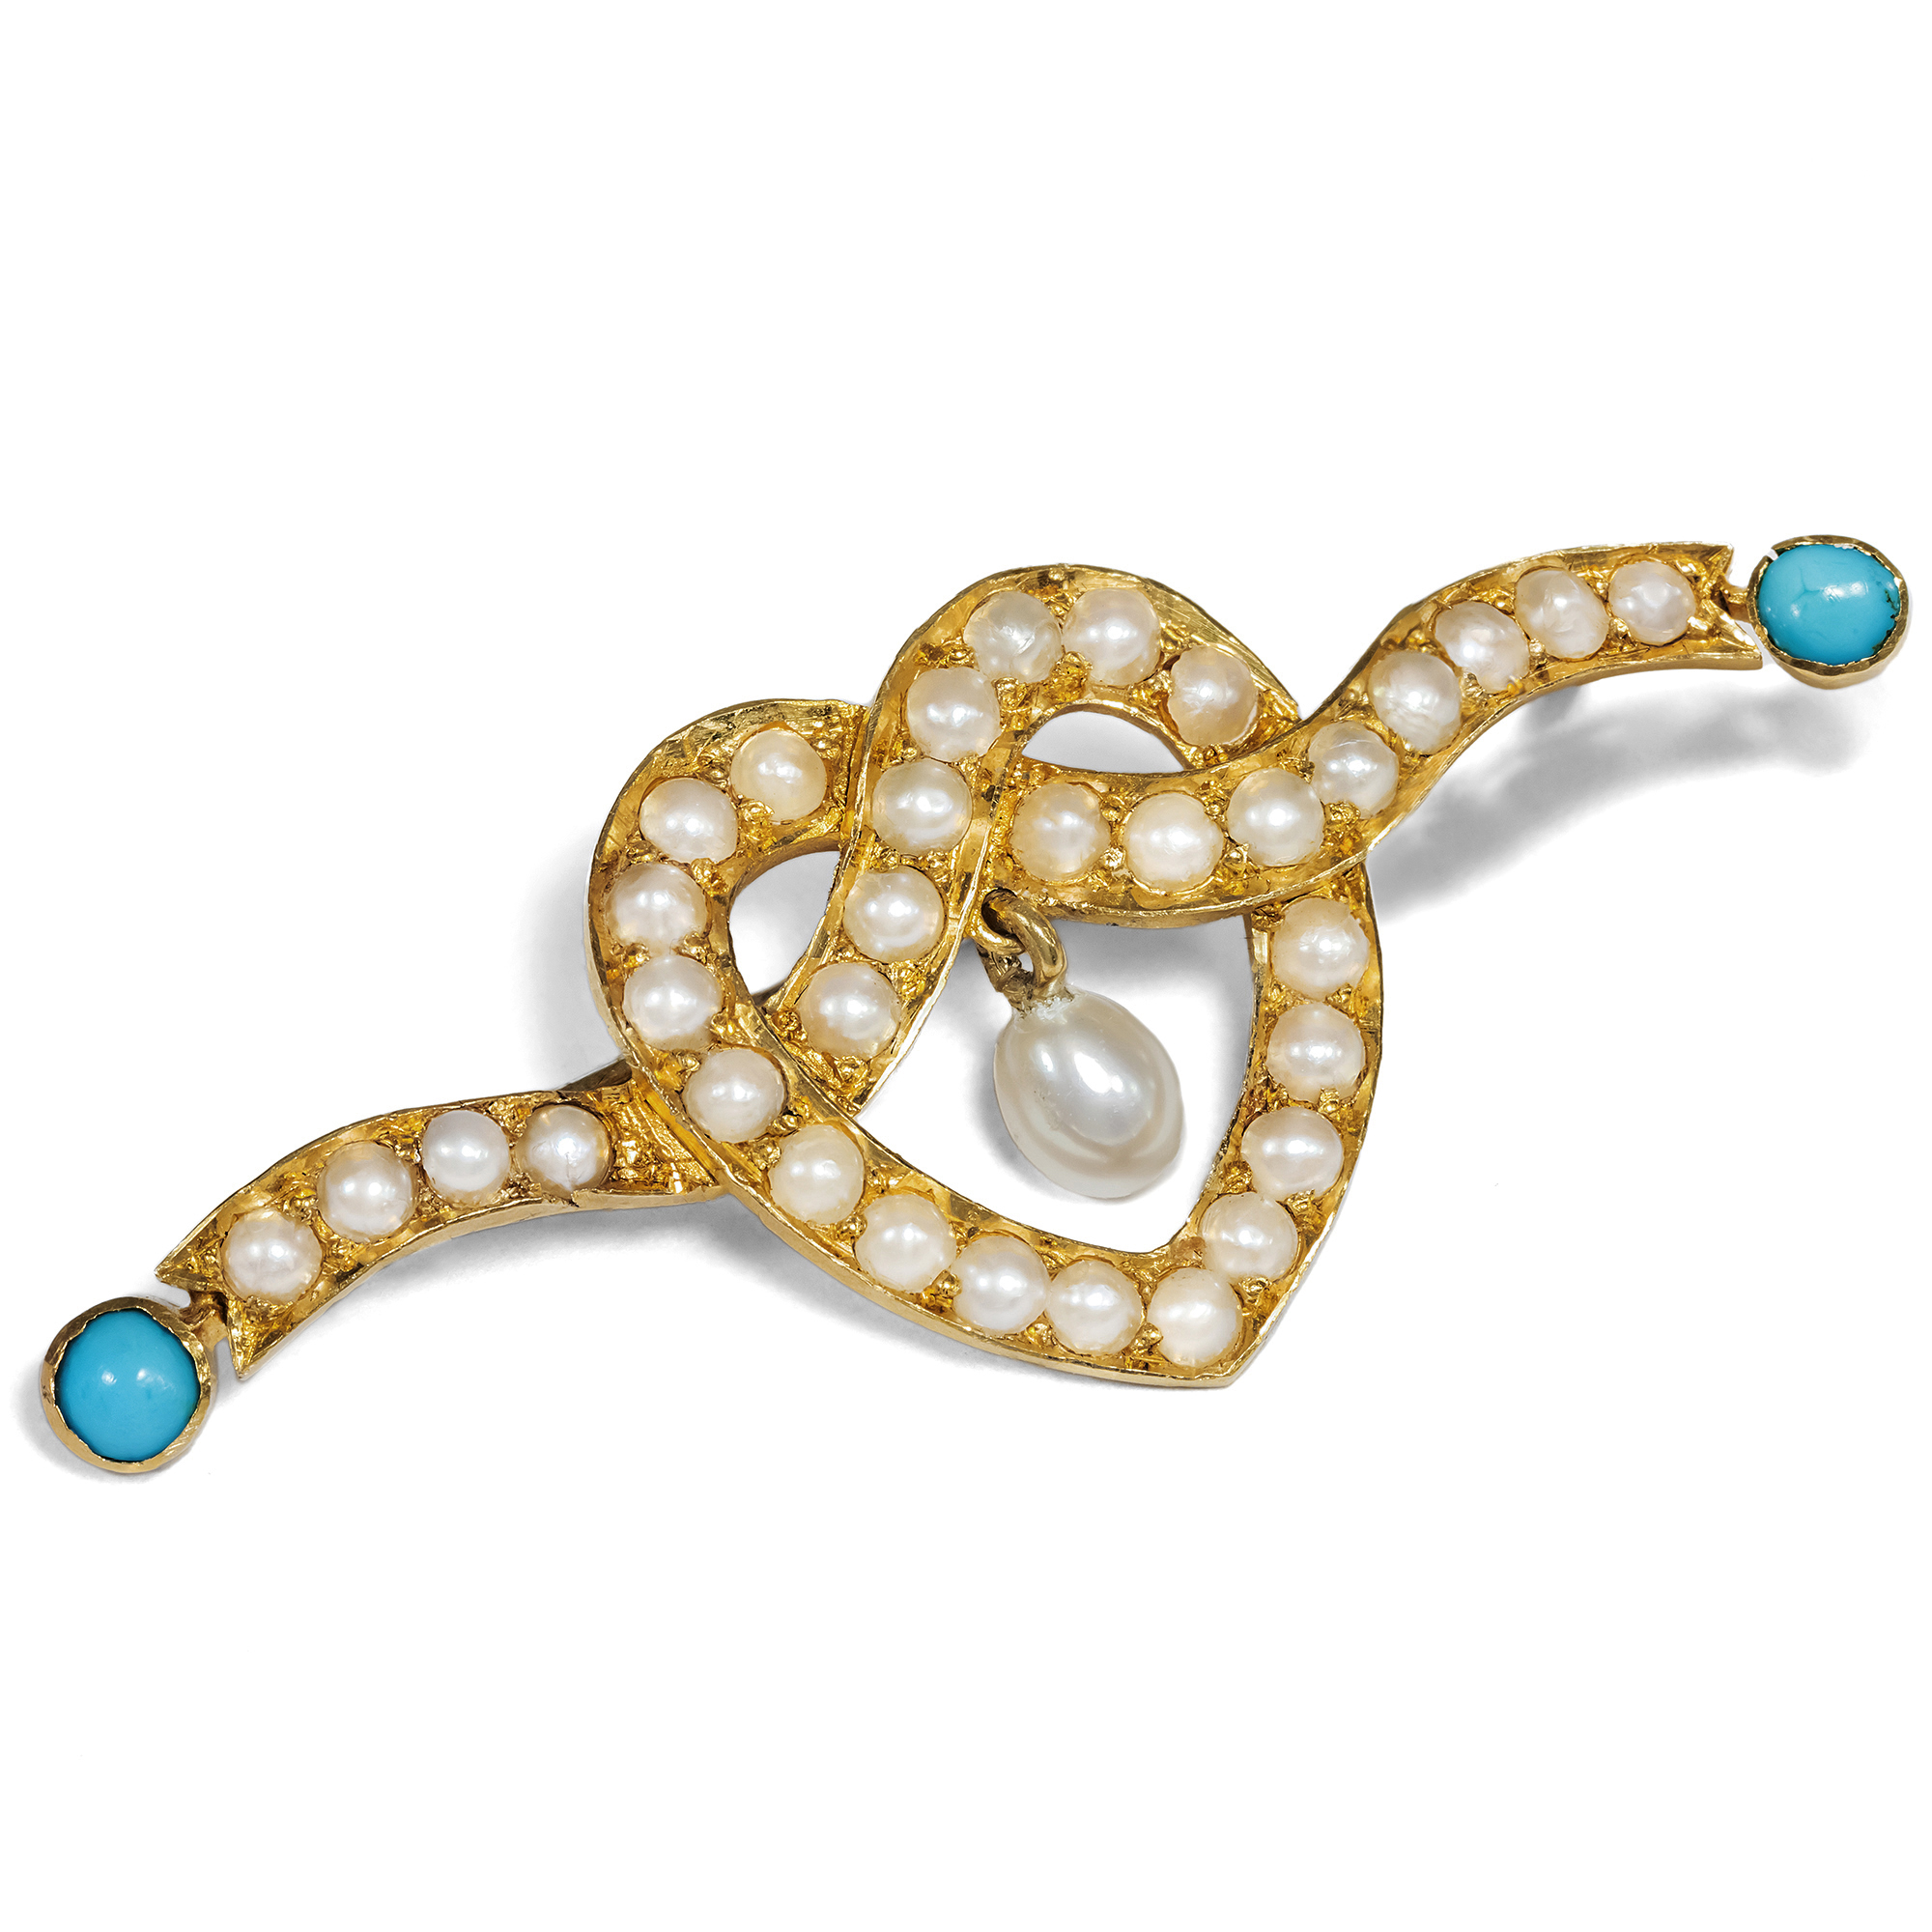 Victorian Brooch With Pearls & Turquoise in Gold, Circa 1890